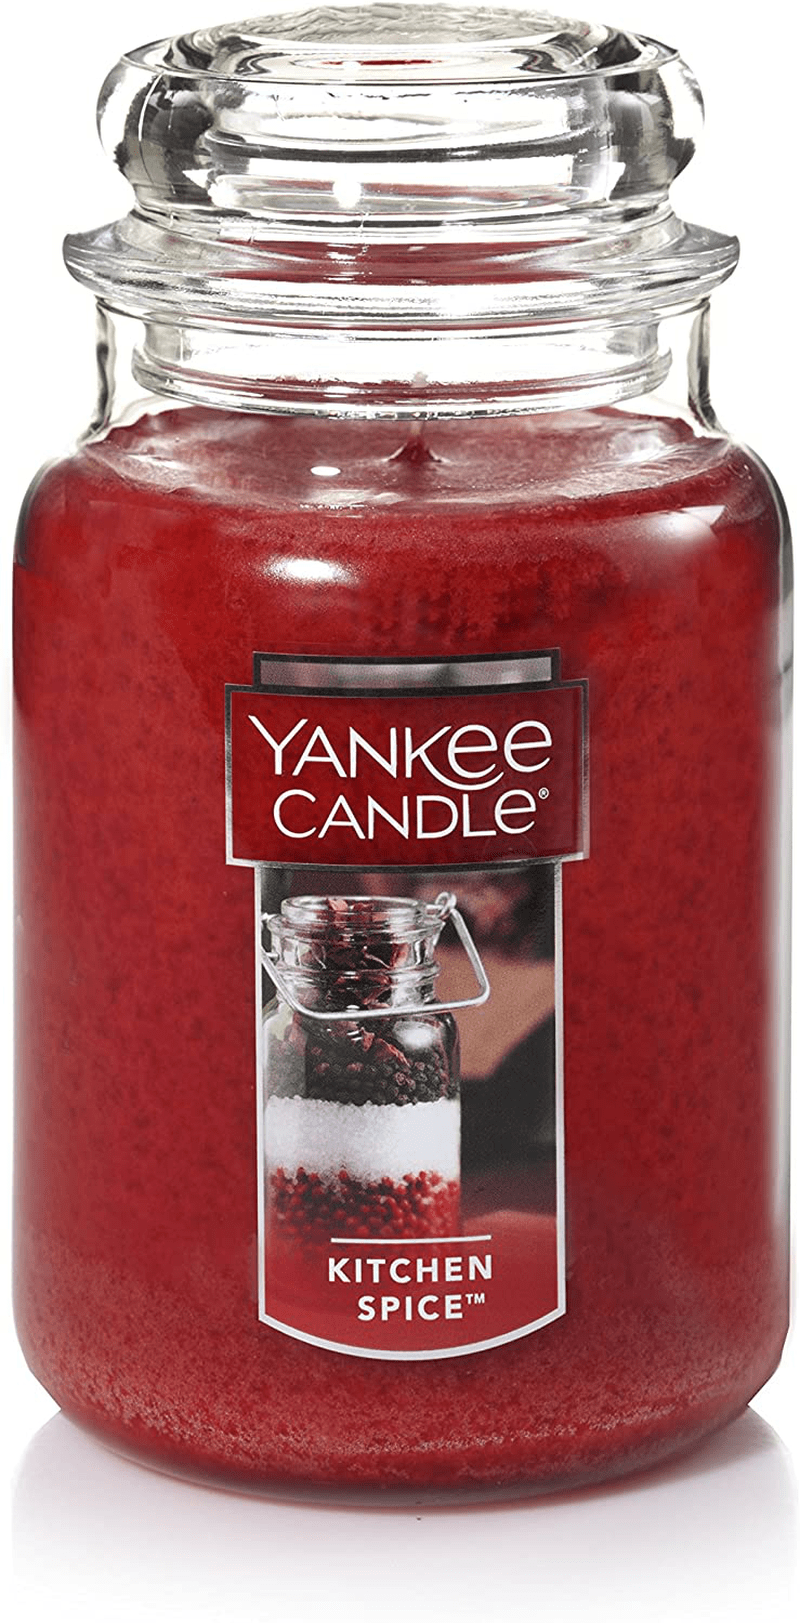 Yankee Candle Large Jar Candle Home Sweet Home Home & Garden > Decor > Home Fragrances > Candles Yankee Candle Kitchen Spice Large Jar 